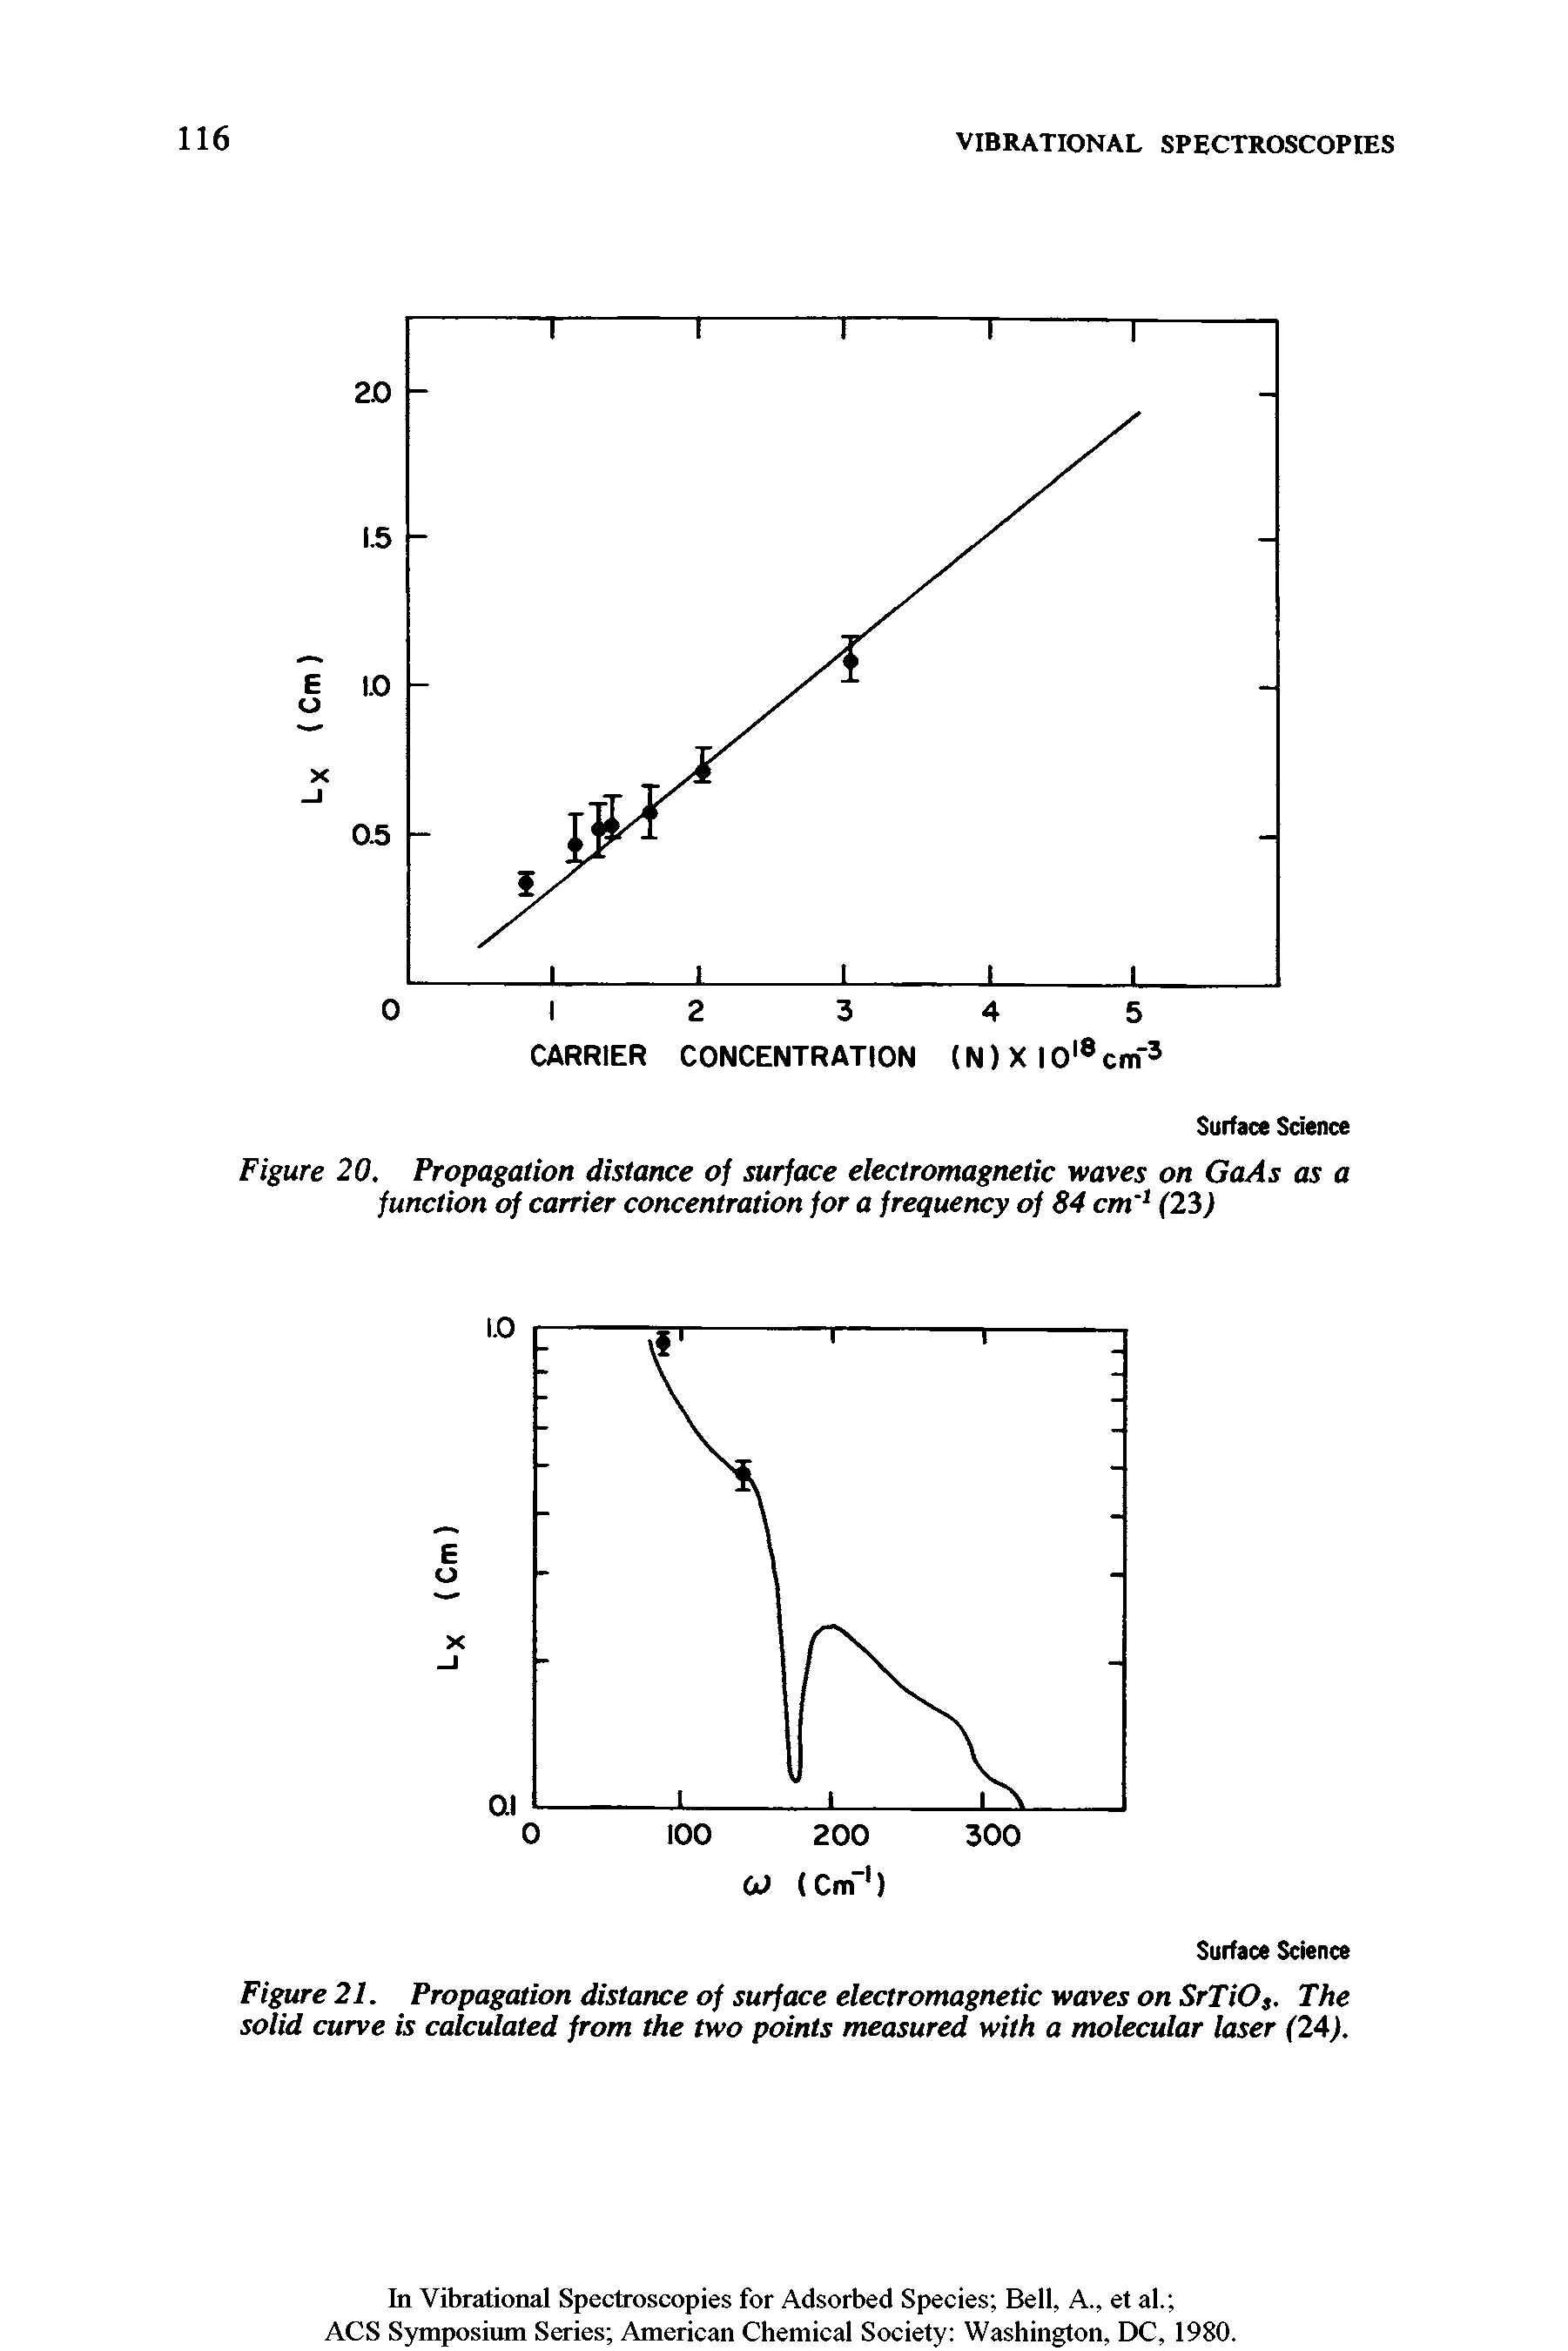 Figure 20. Propagation distance of surface electromagnetic waves on GaAs as a function of carrier concentration for a frequency of 84 cm 1 (23)...